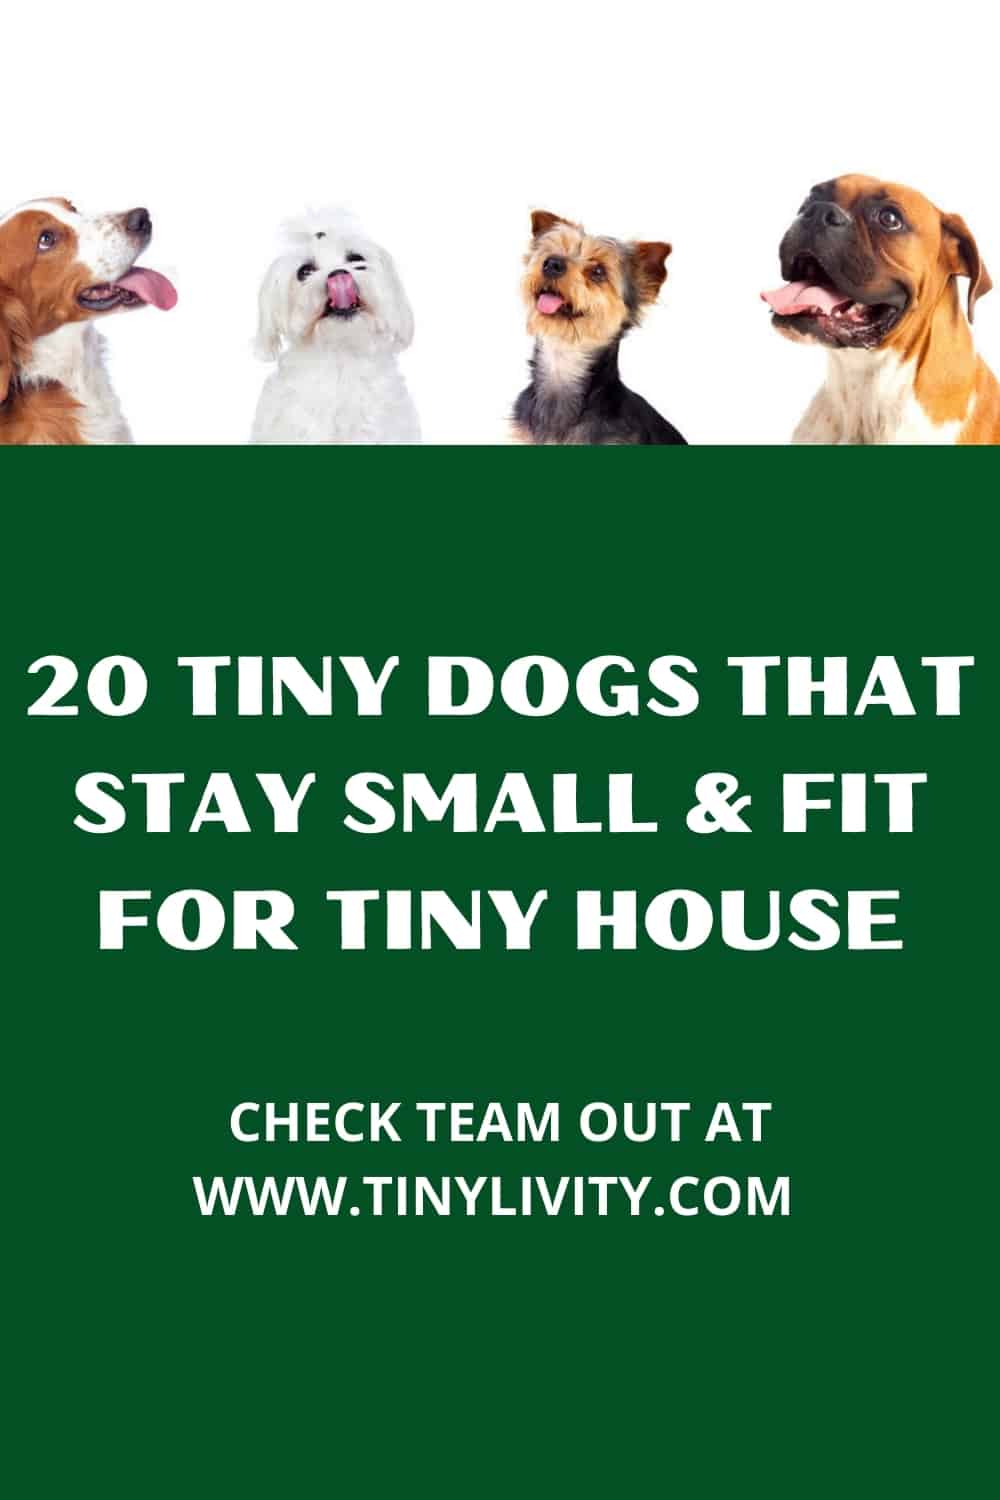 20 Tiny Dogs That Stay Small & Fit for Tiny House